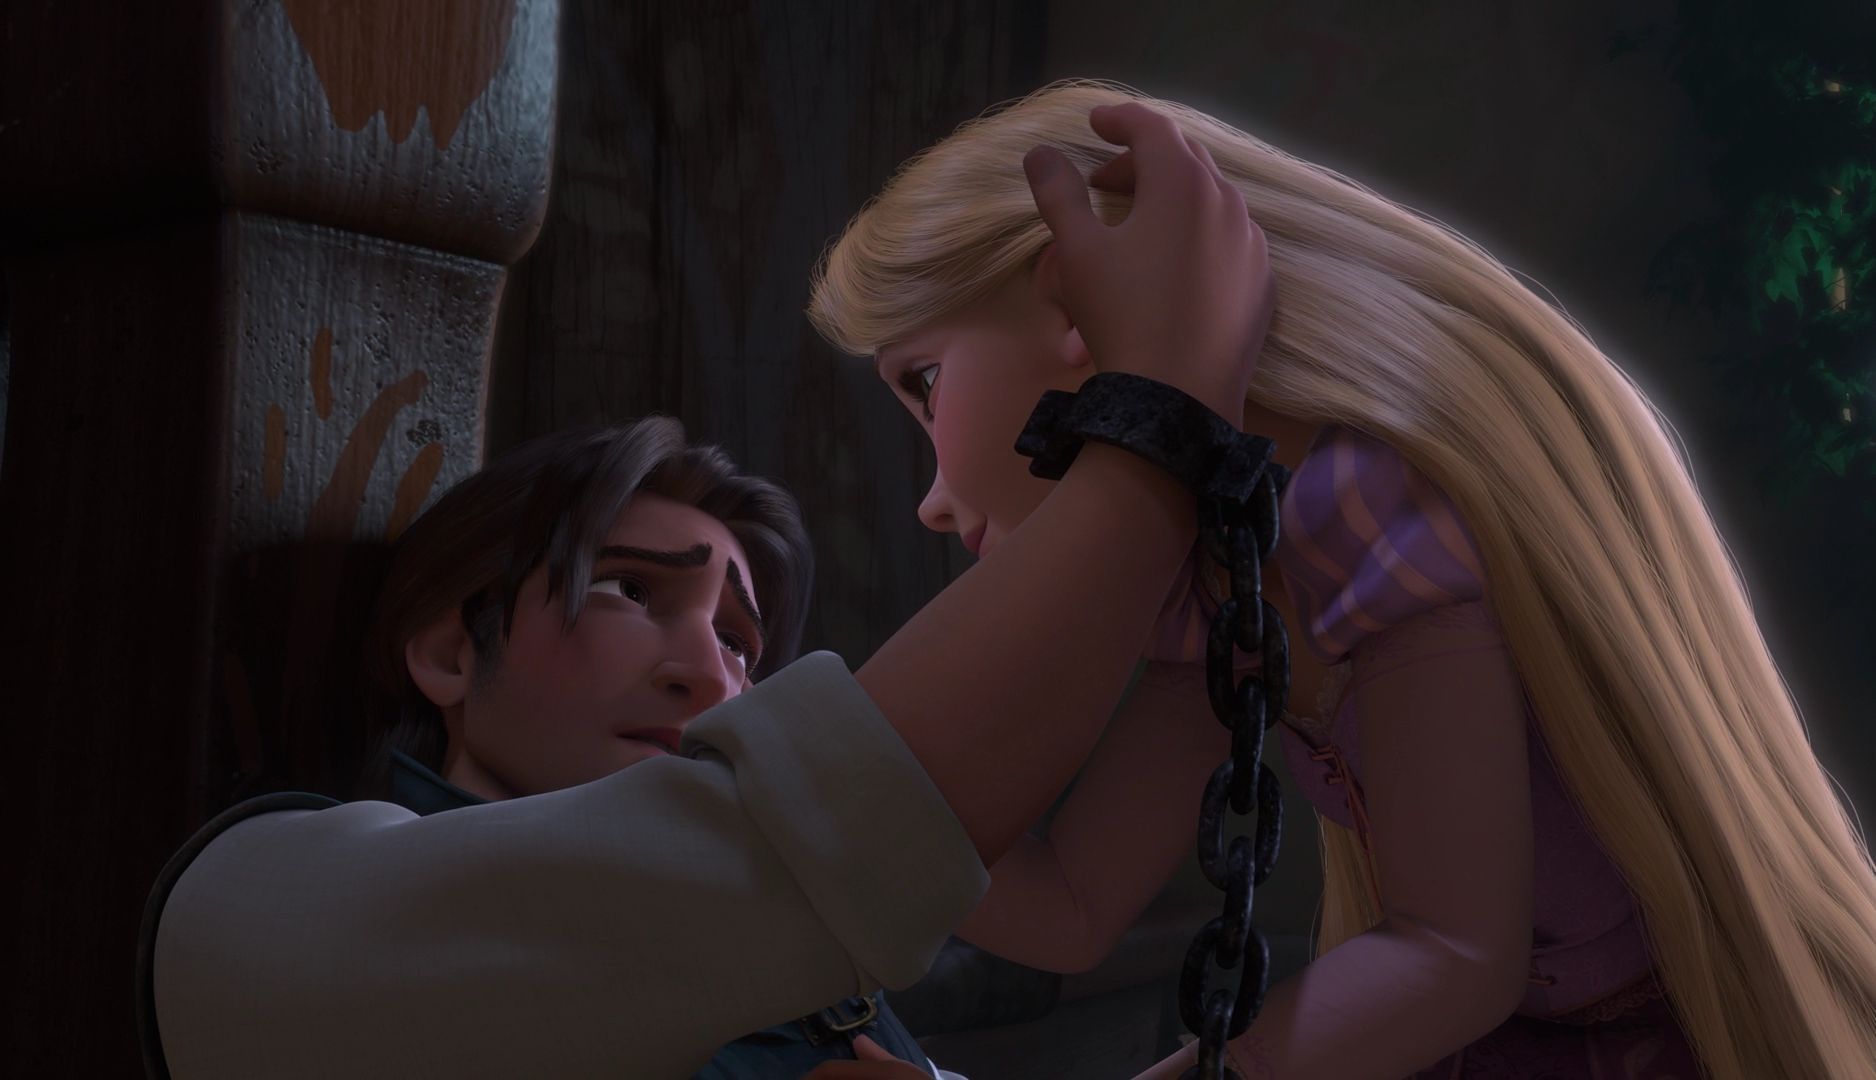 tangled Images on Fanpop.